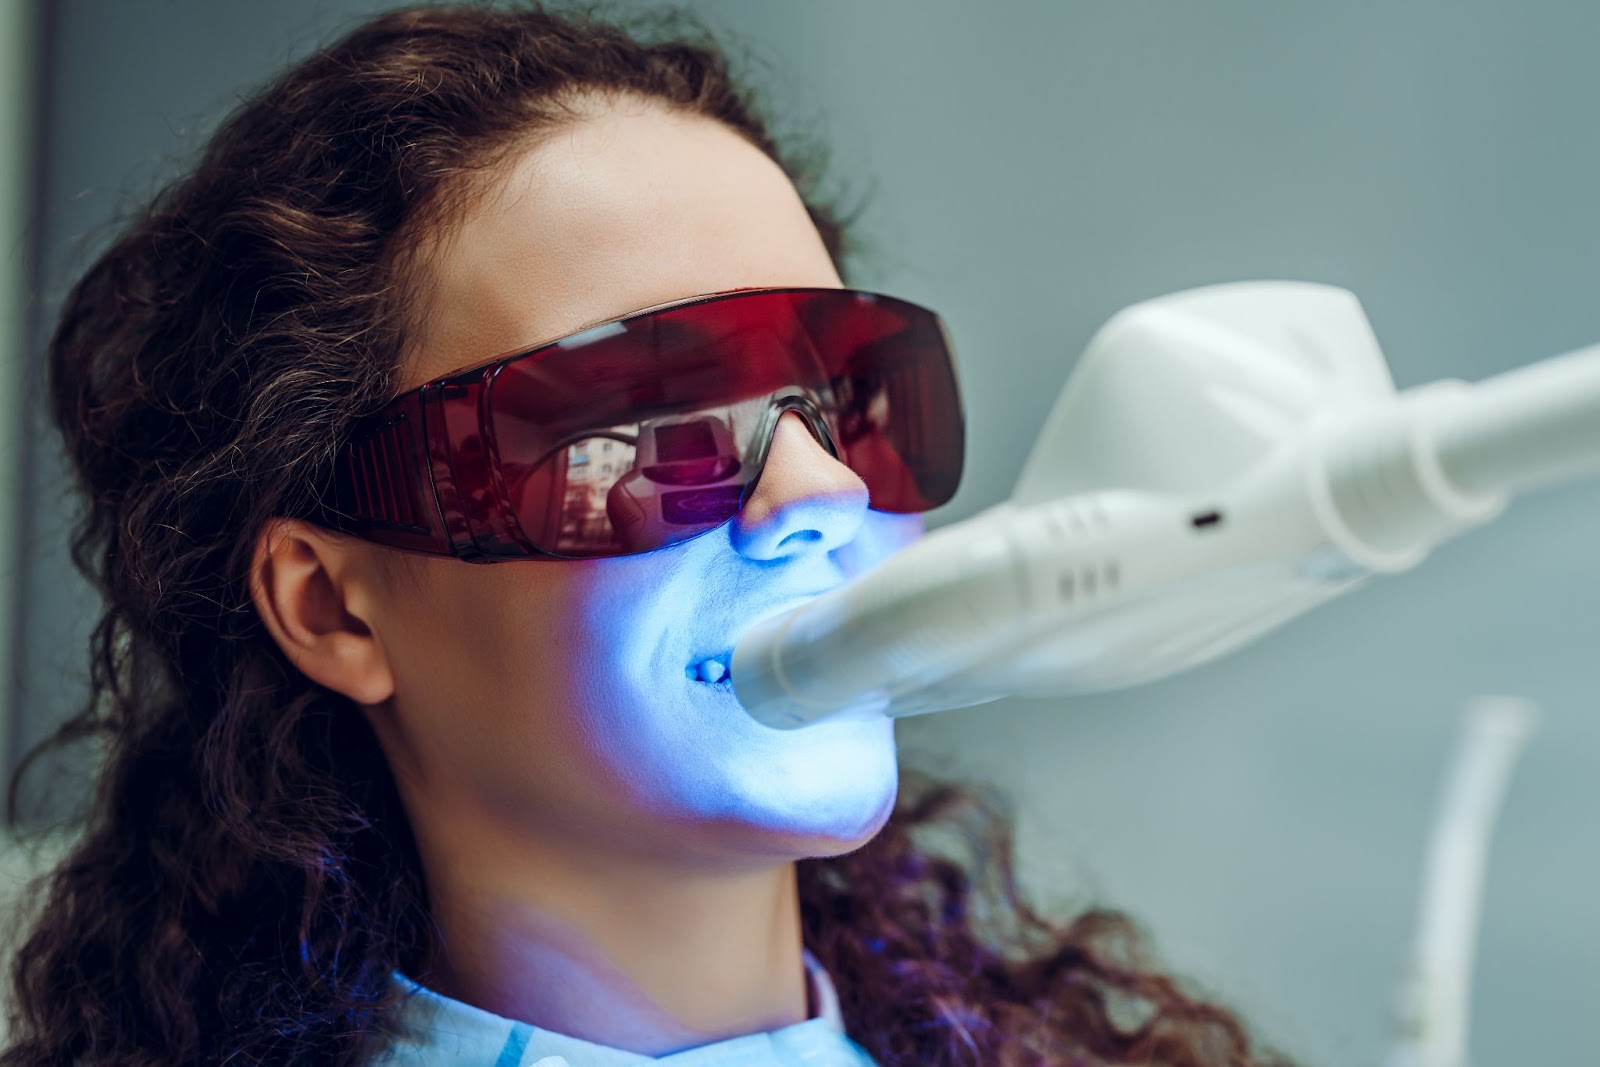 A woman having her teeth professionally whitened with LED lights at the dentist